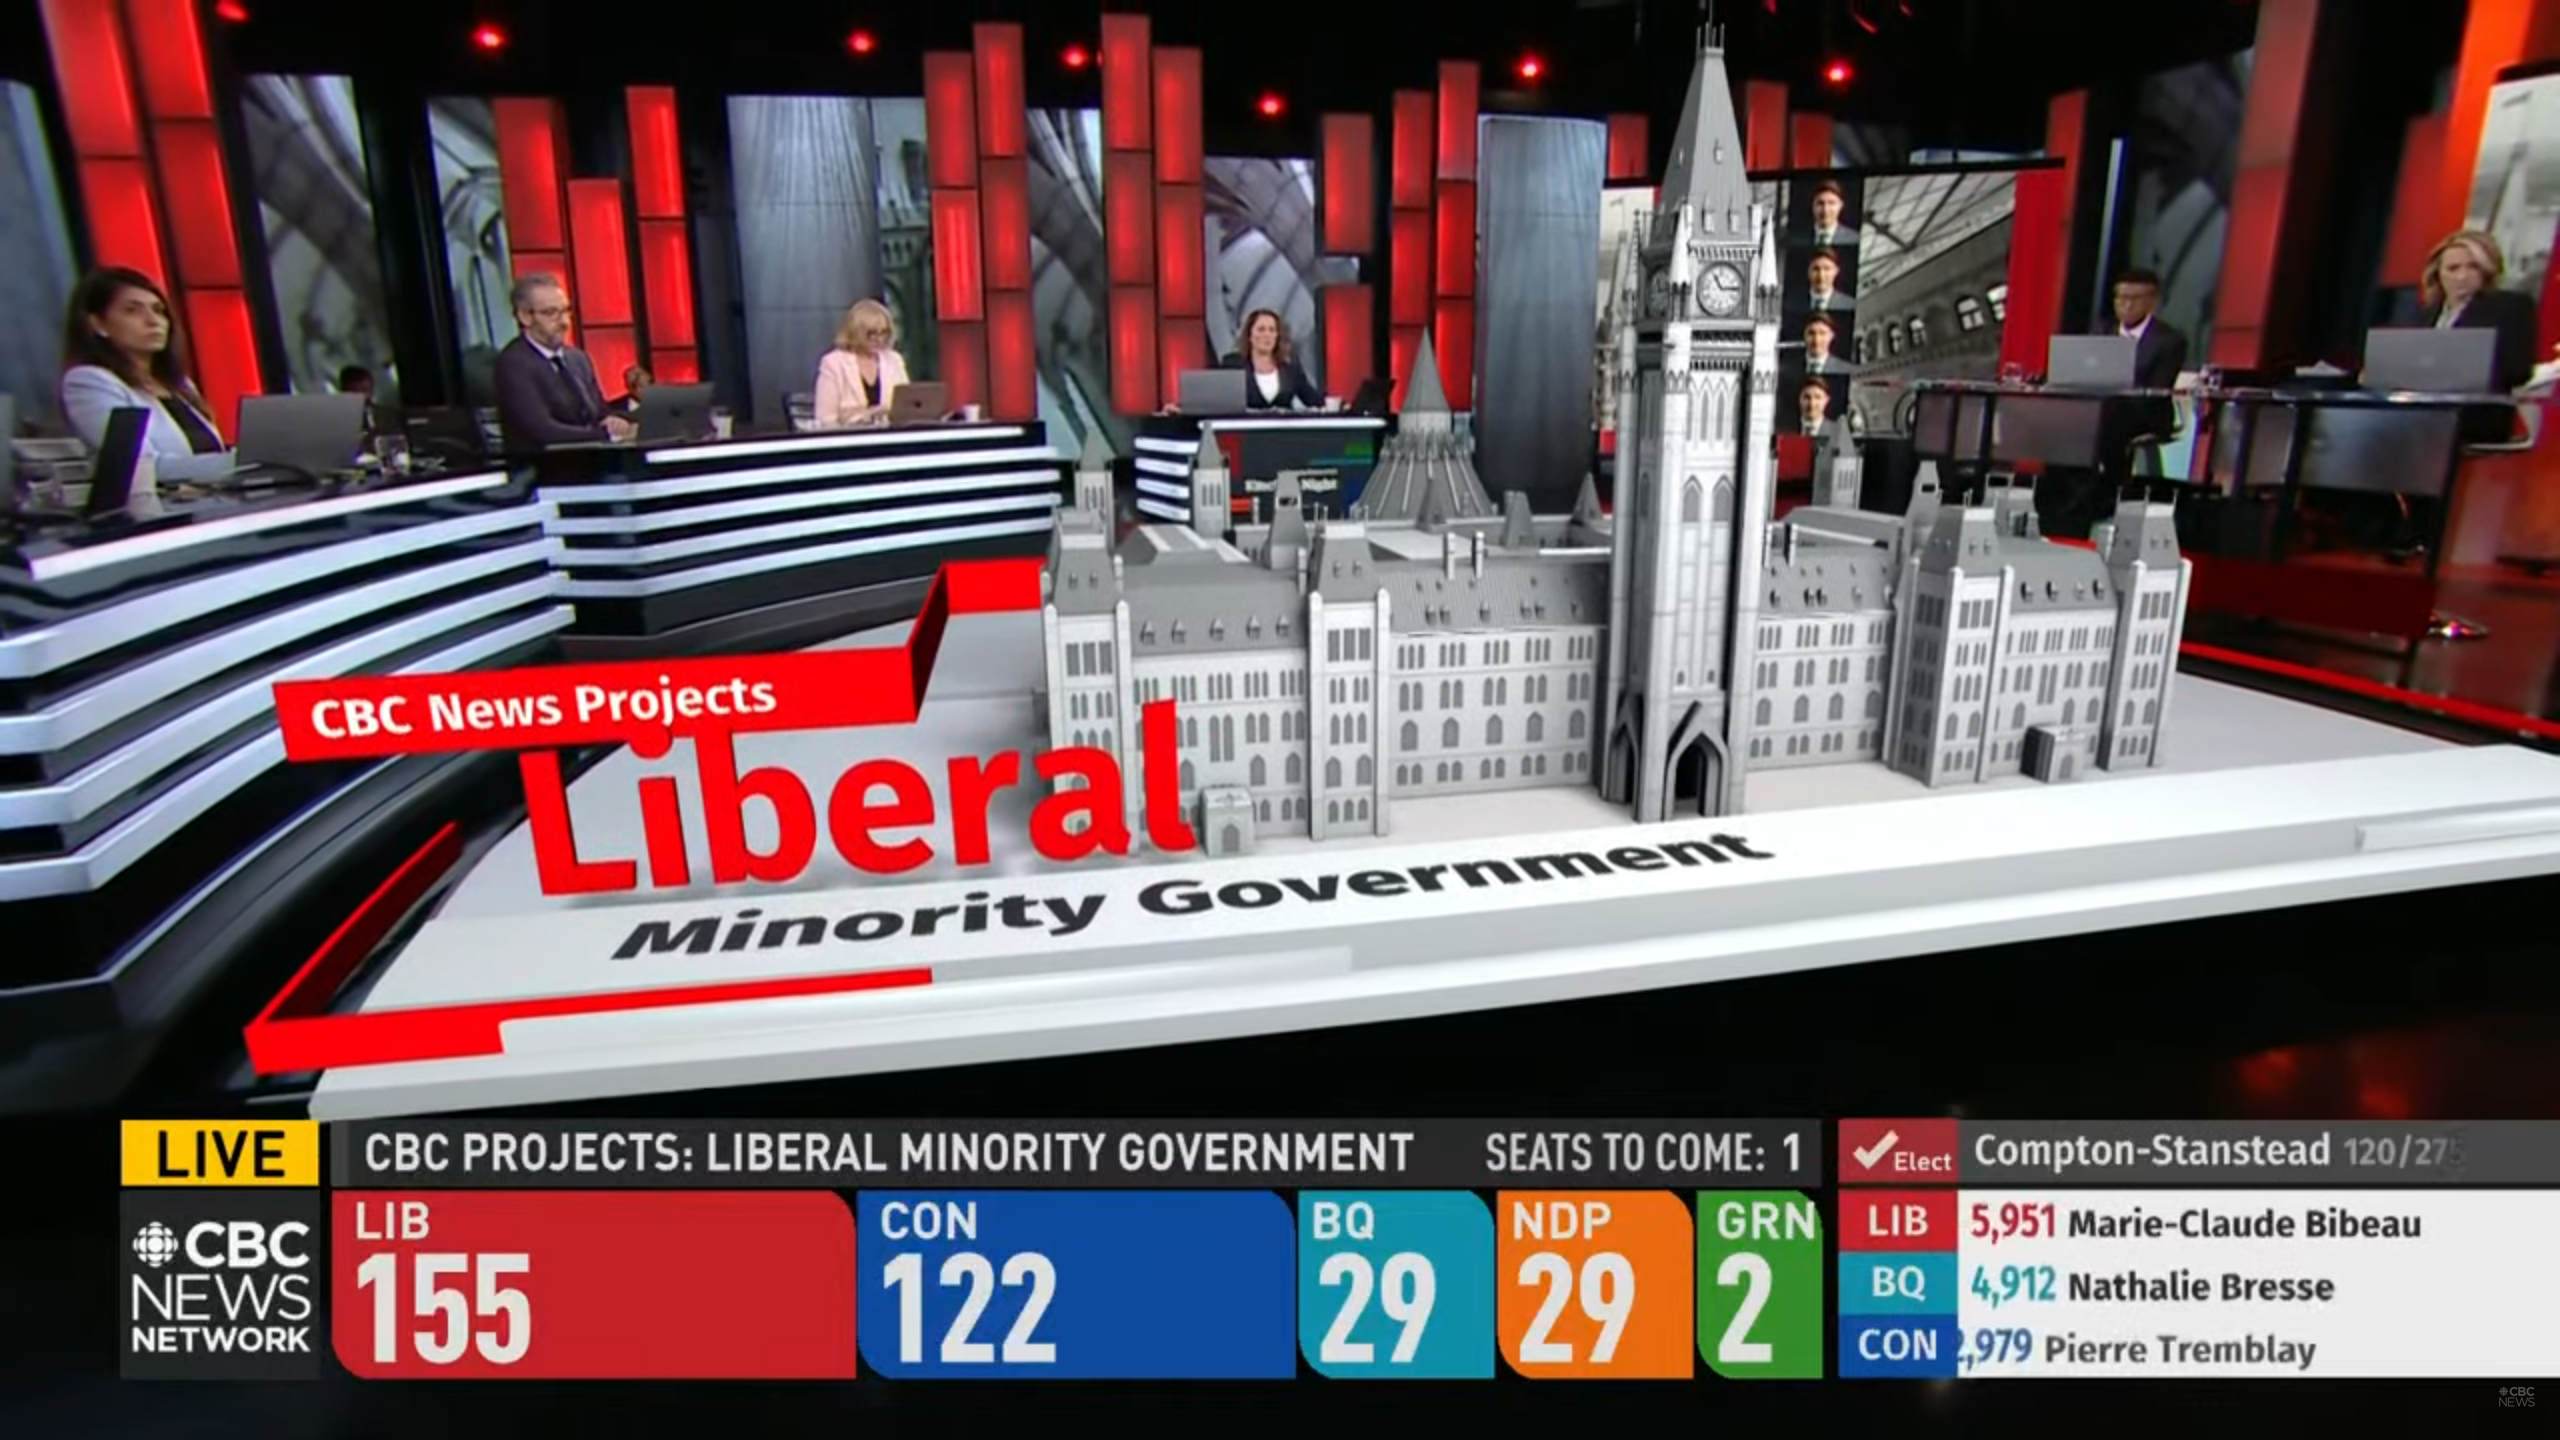 CBC projects Liberal minority government